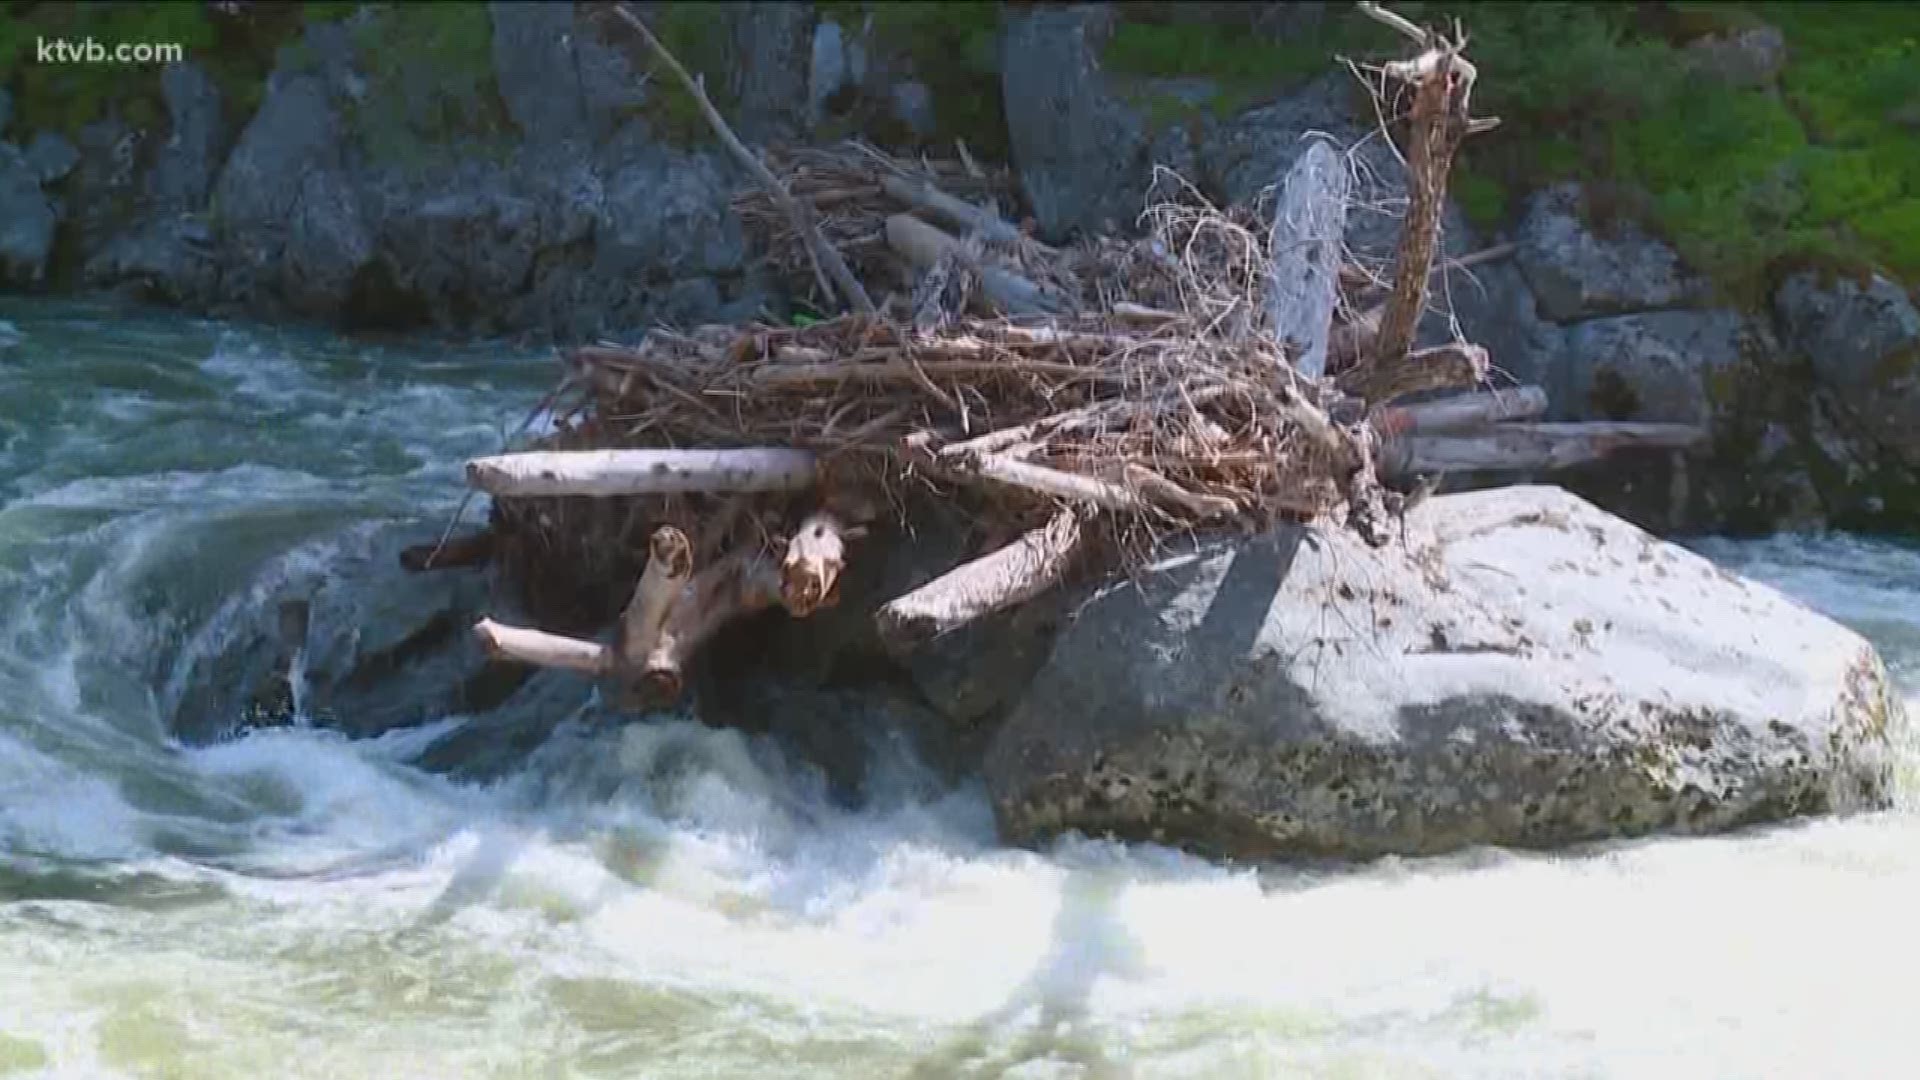 A log jam has built up in part of the Payette River, prompting emergency responders and the Boise National Forest to warn river users to avoid the area.